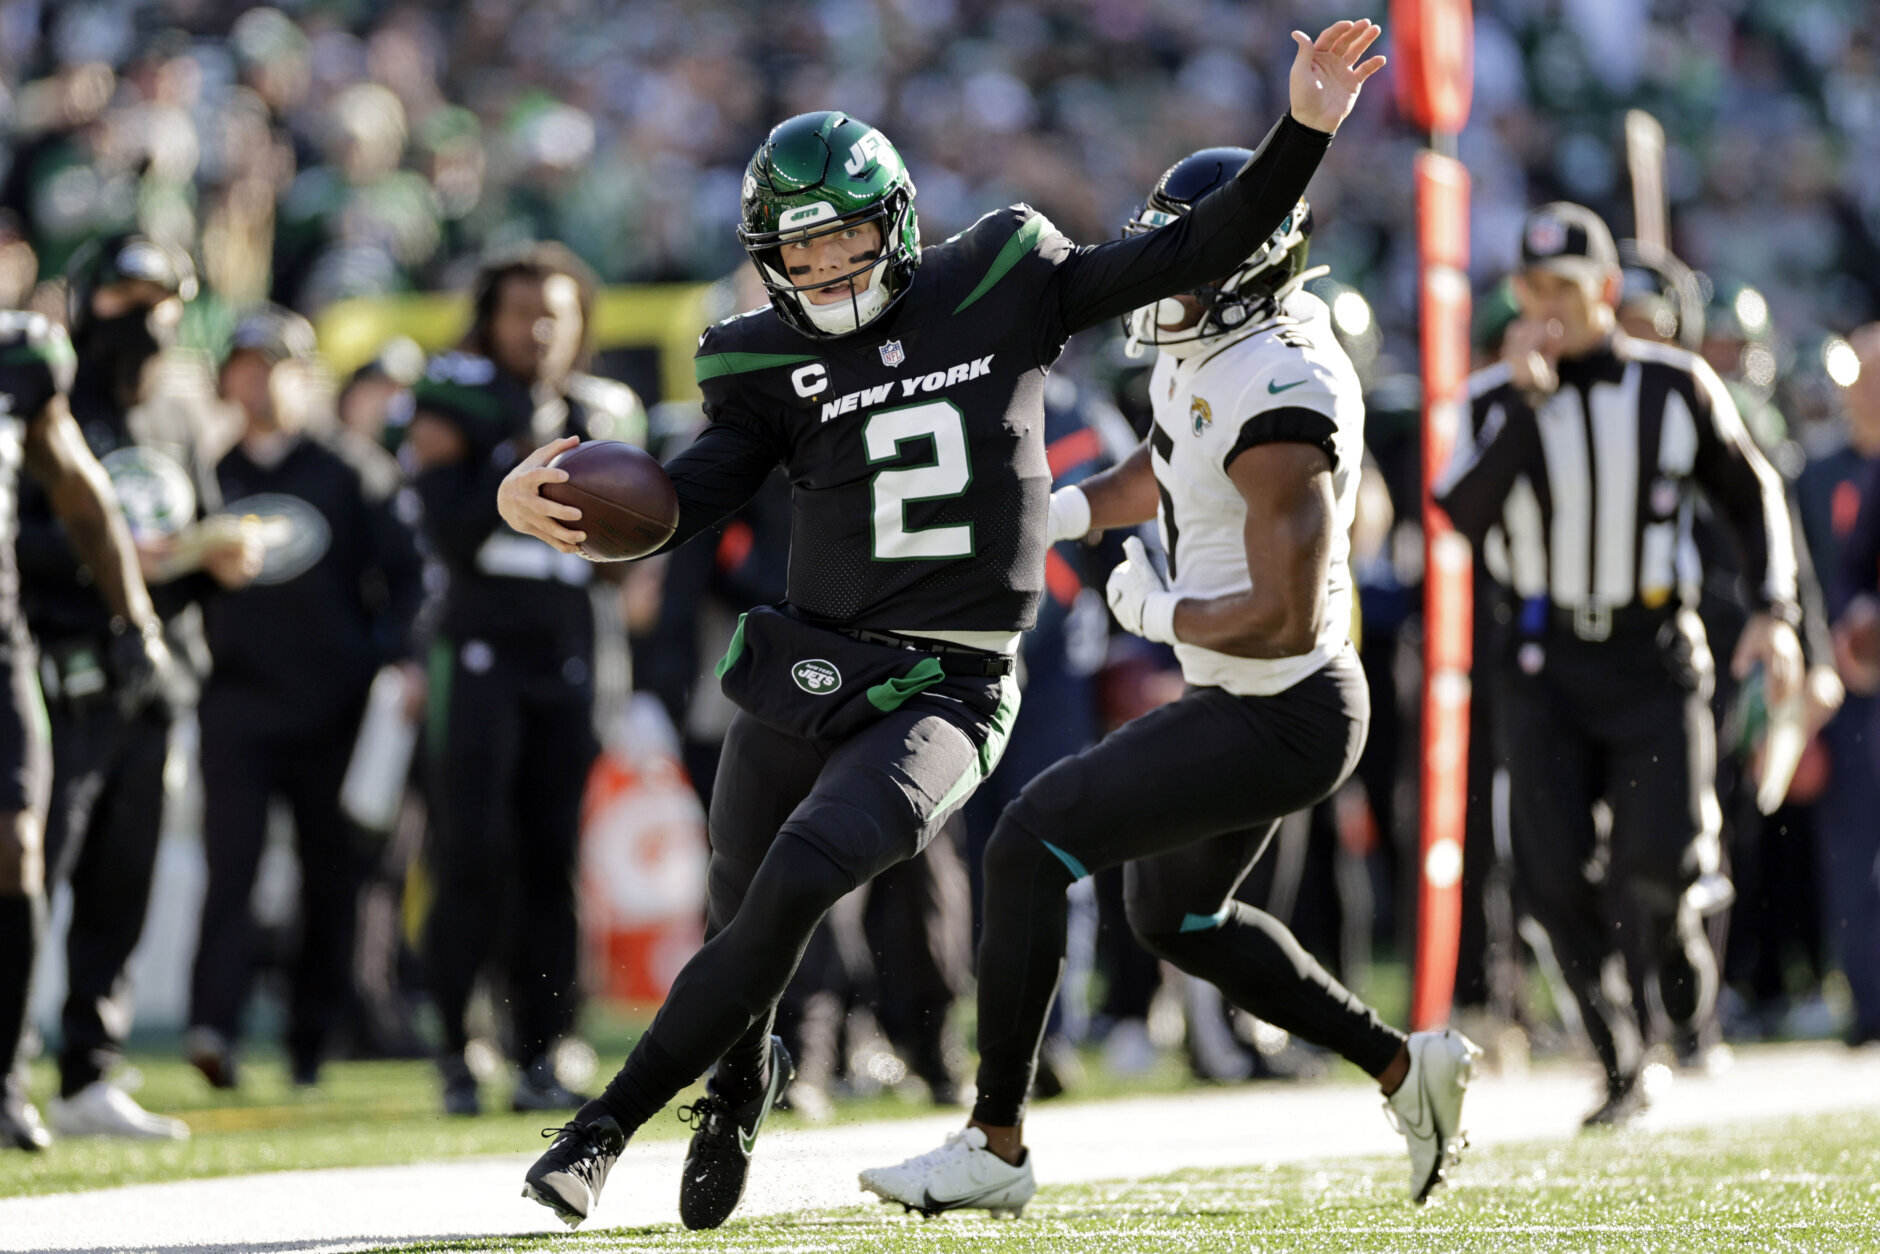 <p><em><strong>Jaguars 21</strong></em><br />
<em><strong>Jets 26</strong></em></p>
<p>The Jacksonville Jaguars are now on the clock and Zach Wilson has the sickest QB touchdown run of the year.</p>
<p>https://twitter.com/NFL/status/1475171477104119808?s=20</p>
